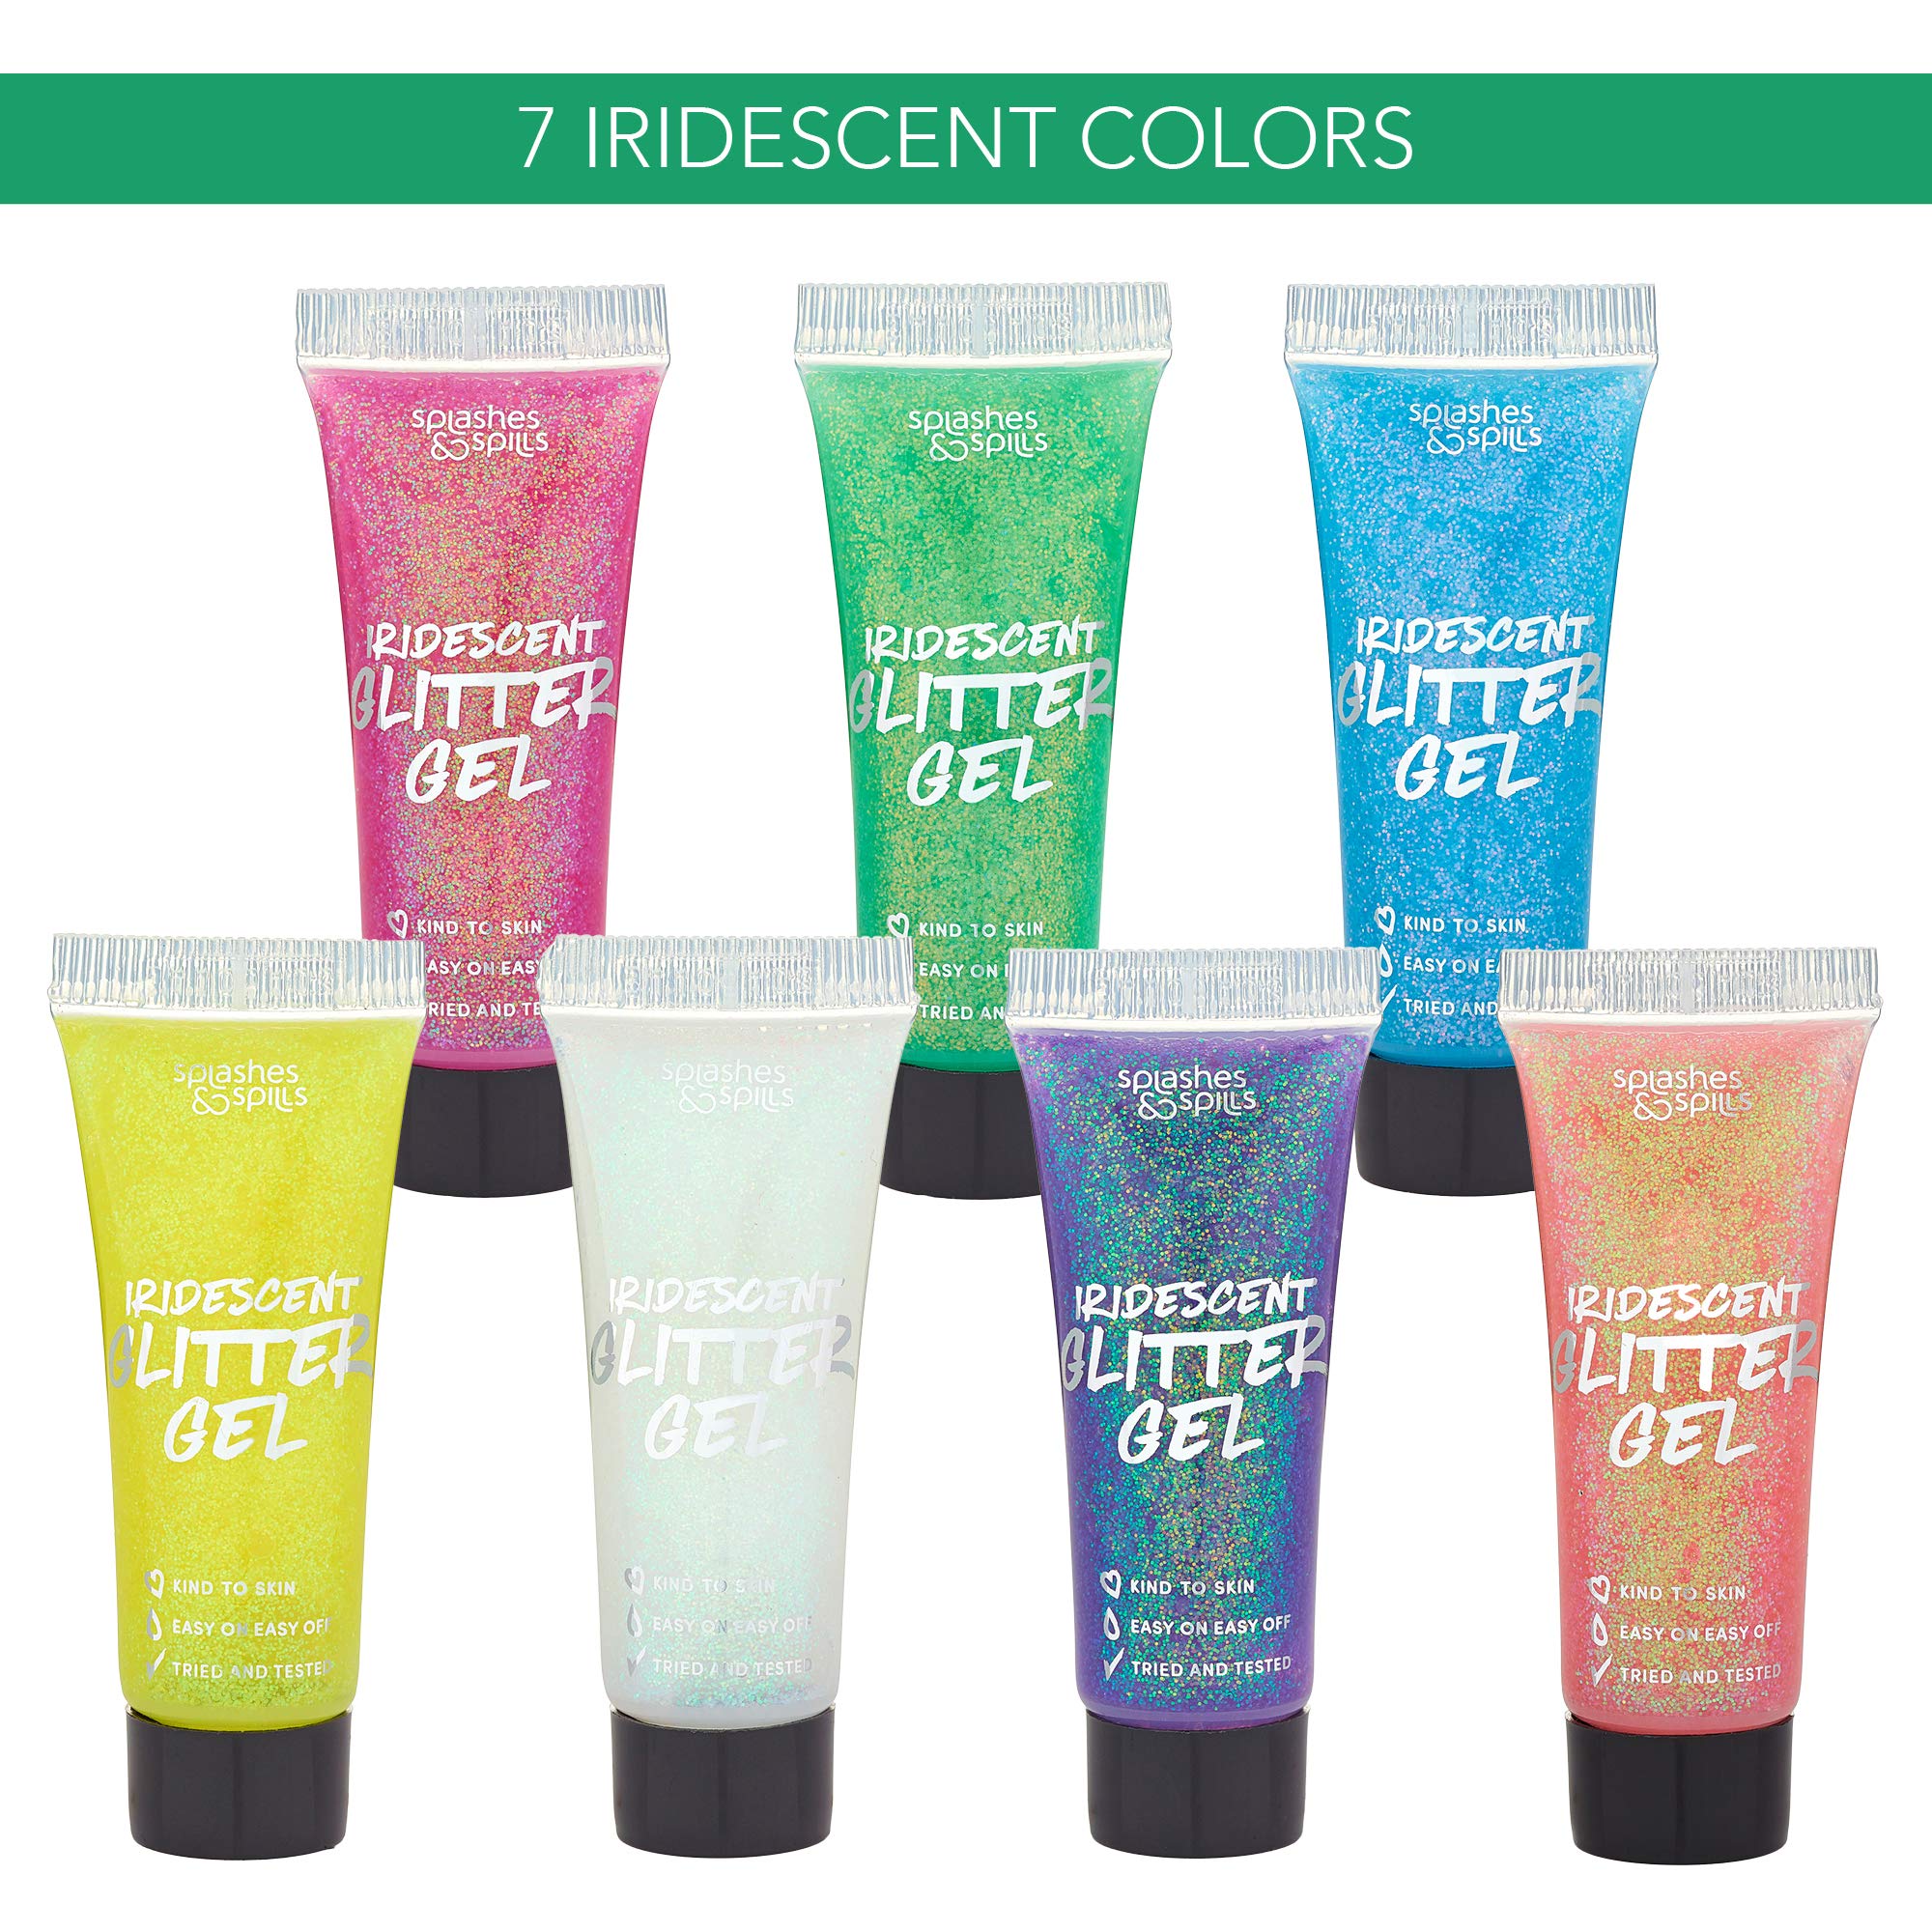 Iridescent Glitter Body Paint Gel - 7 Color Cosmetic Set 10 ml Tubes Shimmer for Hair, Body, Face - Great for Dress Up, Festival, Costume Party, Halloween - by Splashes and Spills